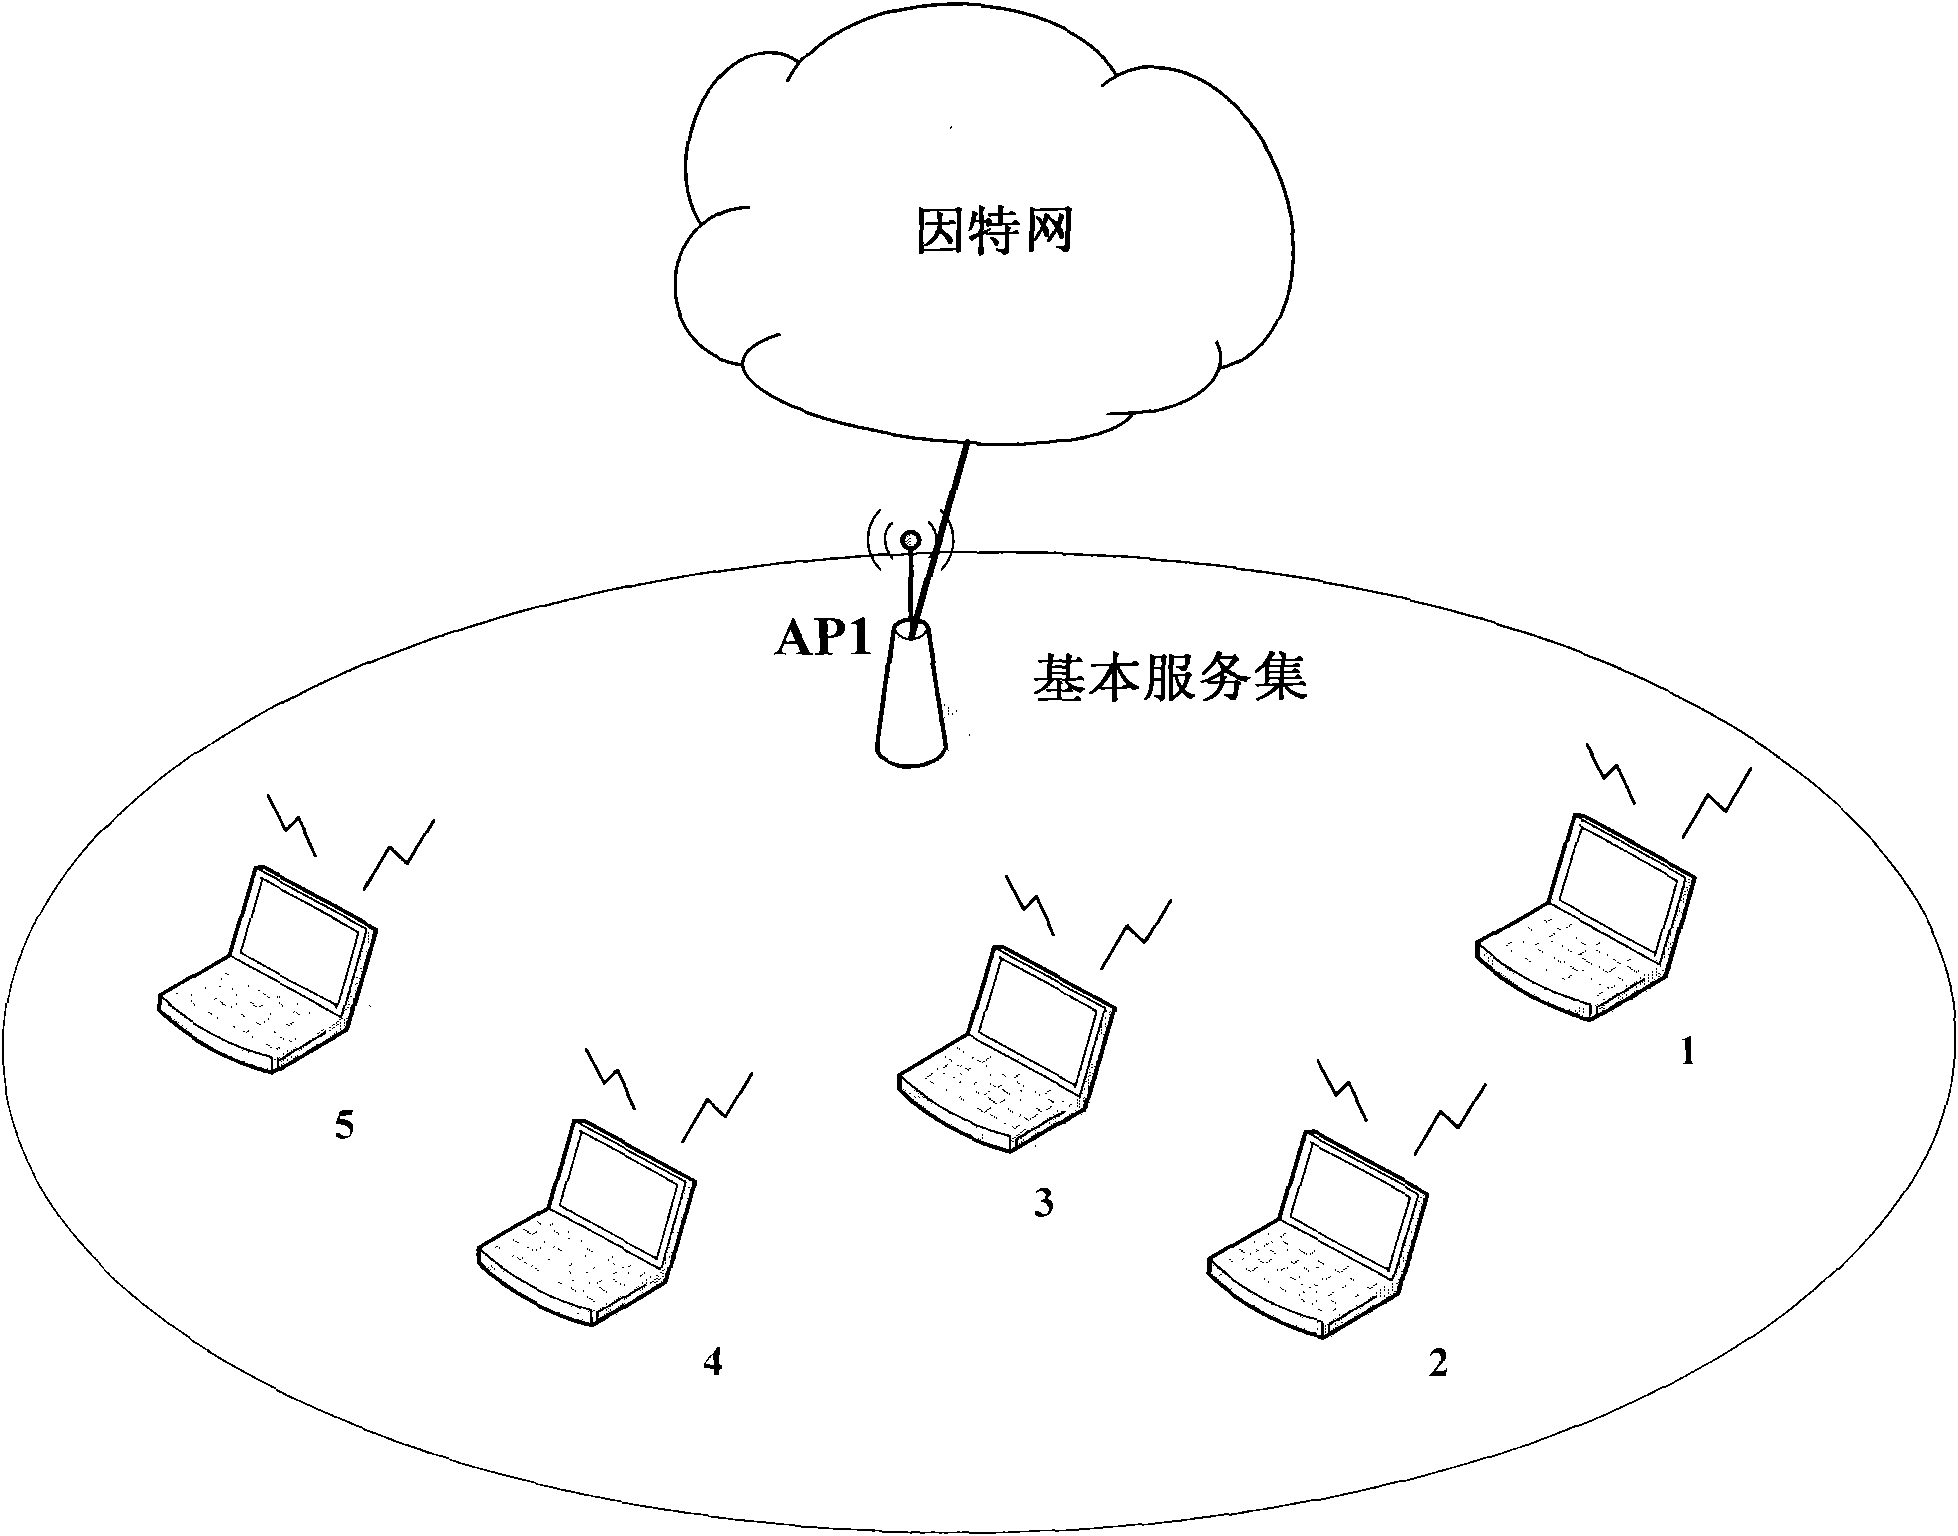 Network access behavior-based access control method and system for wireless local area network